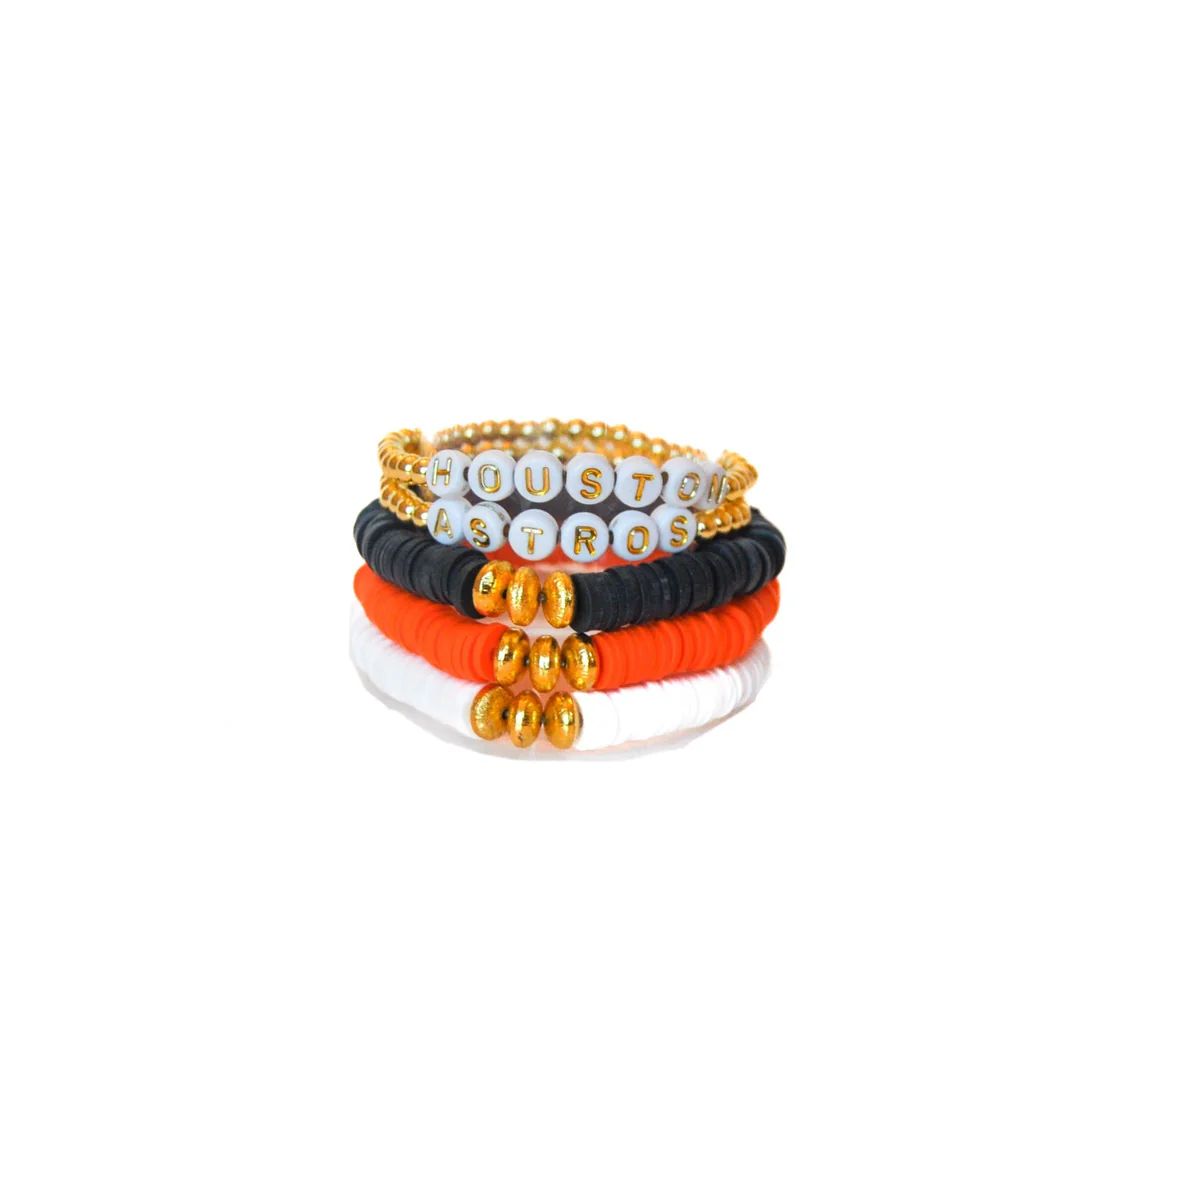 The Astros Stack | Cocos Beads and Co